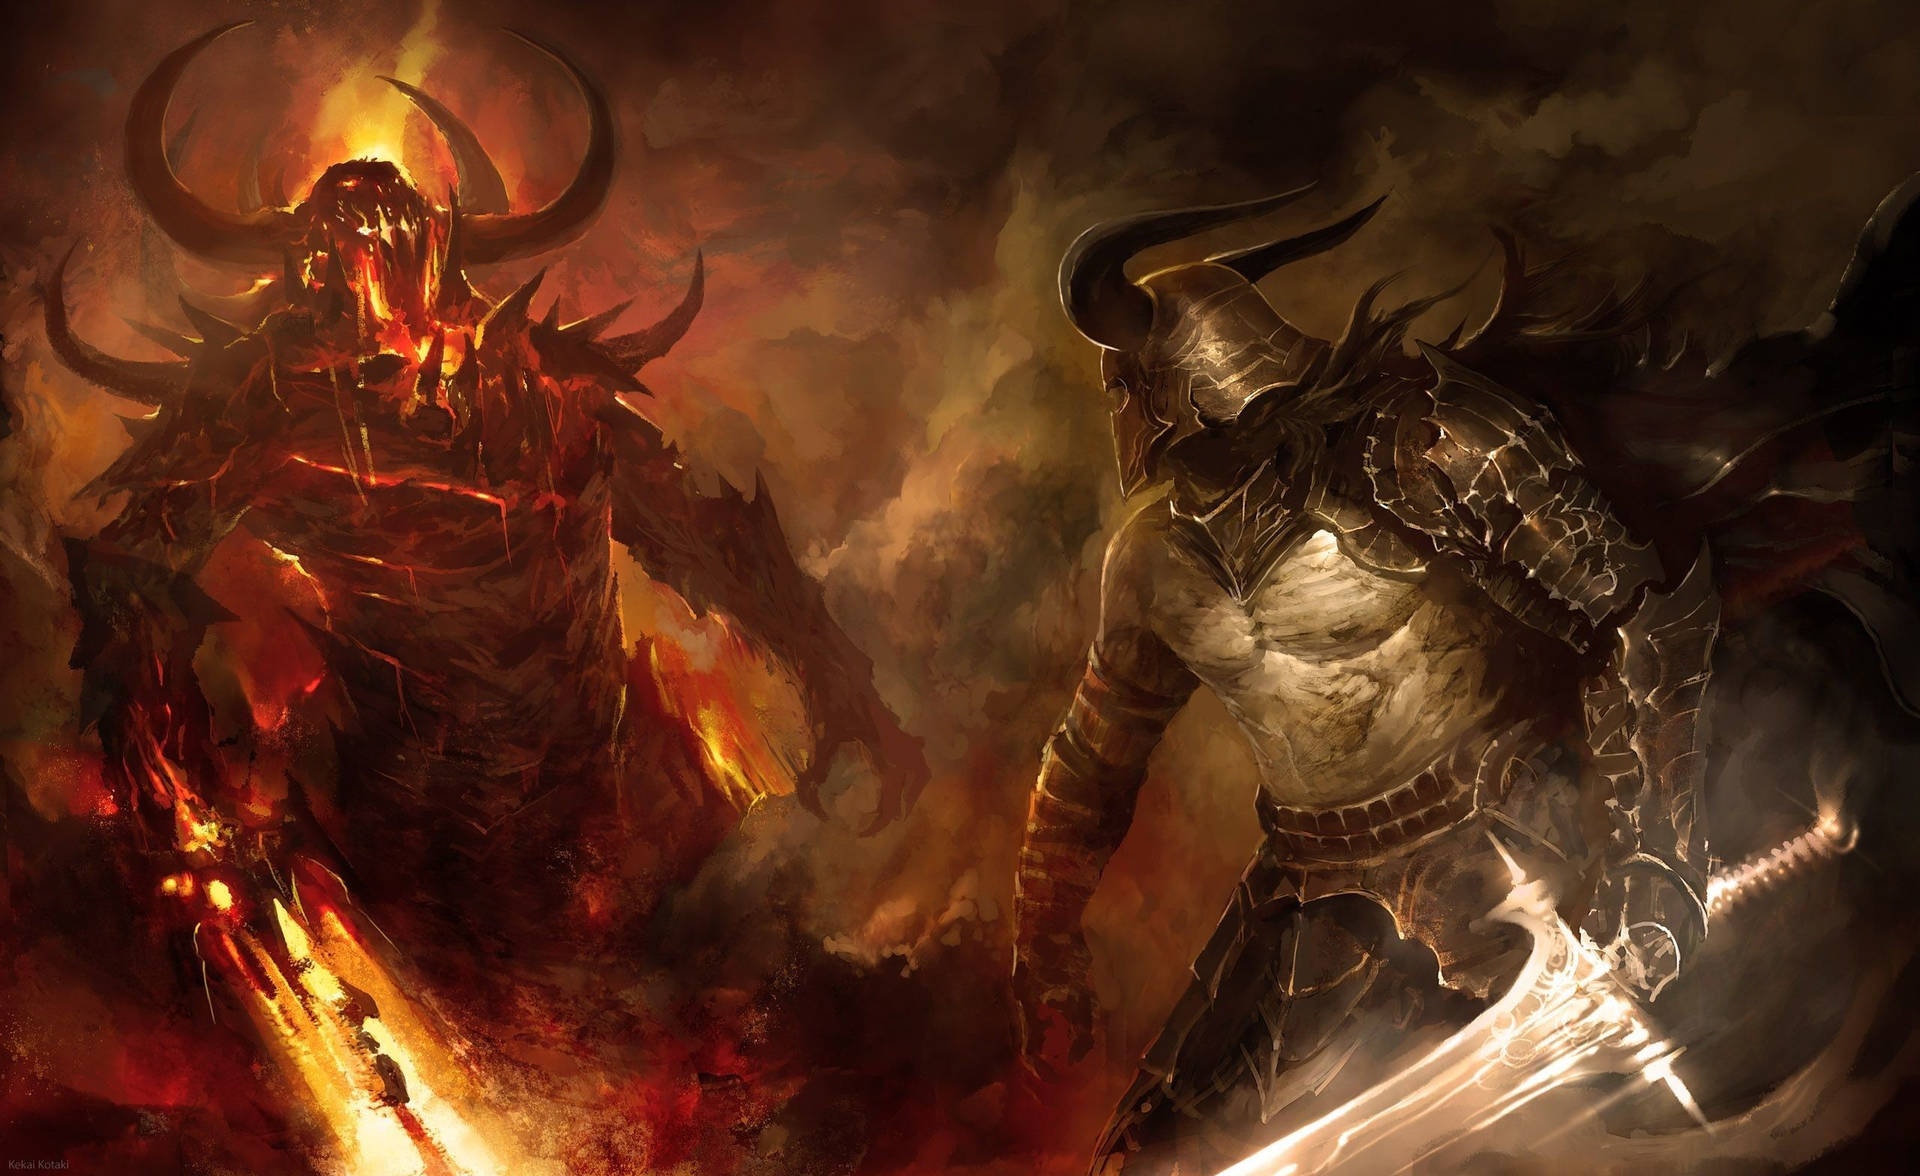 Two Demons With Swords In The Fire Wallpaper